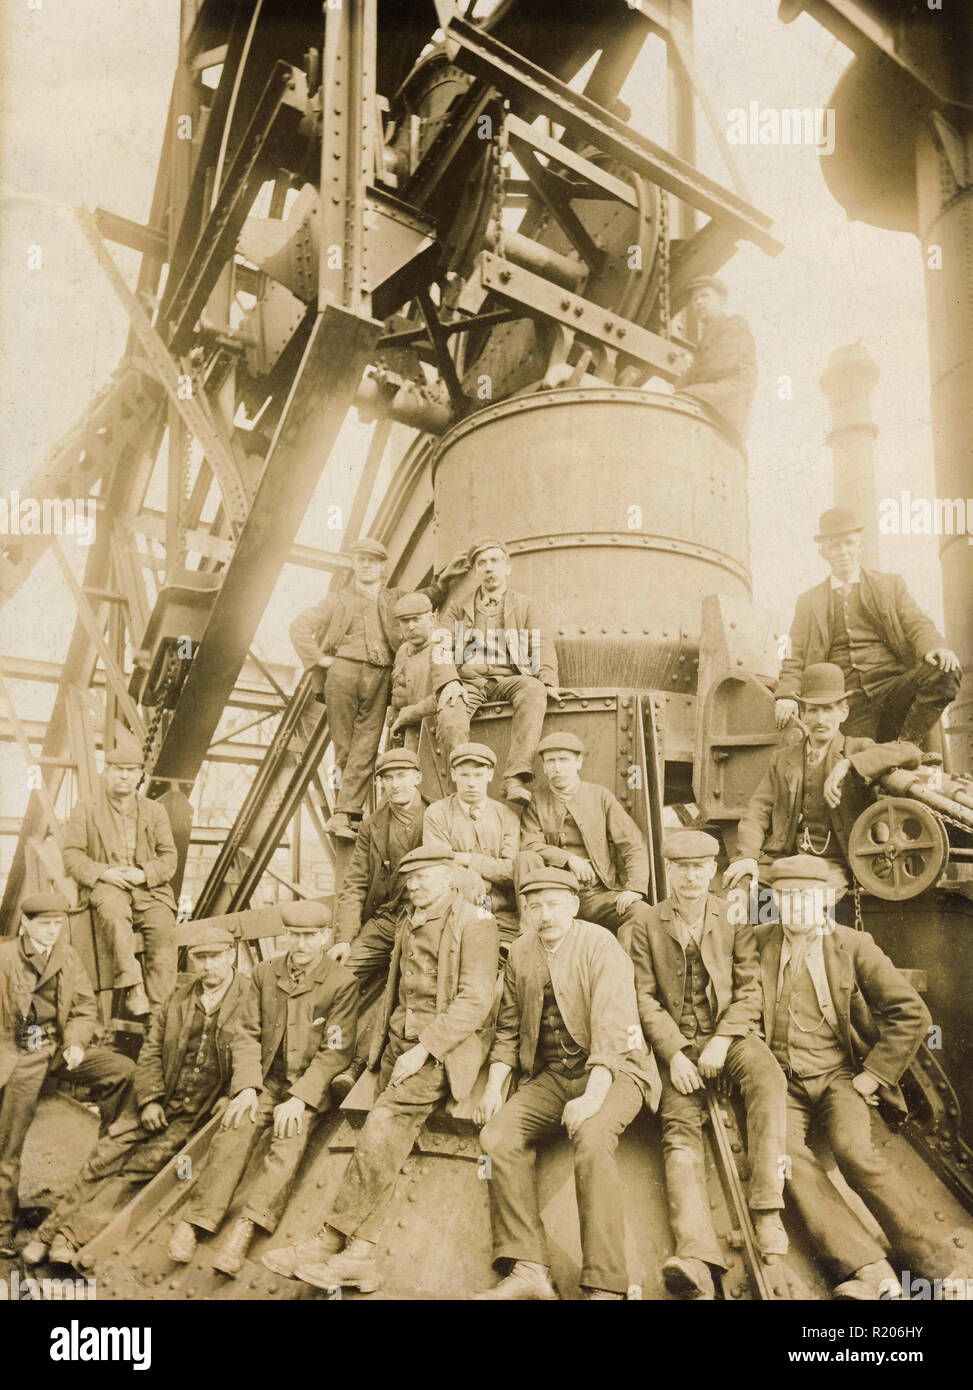 Historic Archive Image of industrial workers, South Wales c1900s Stock Photo